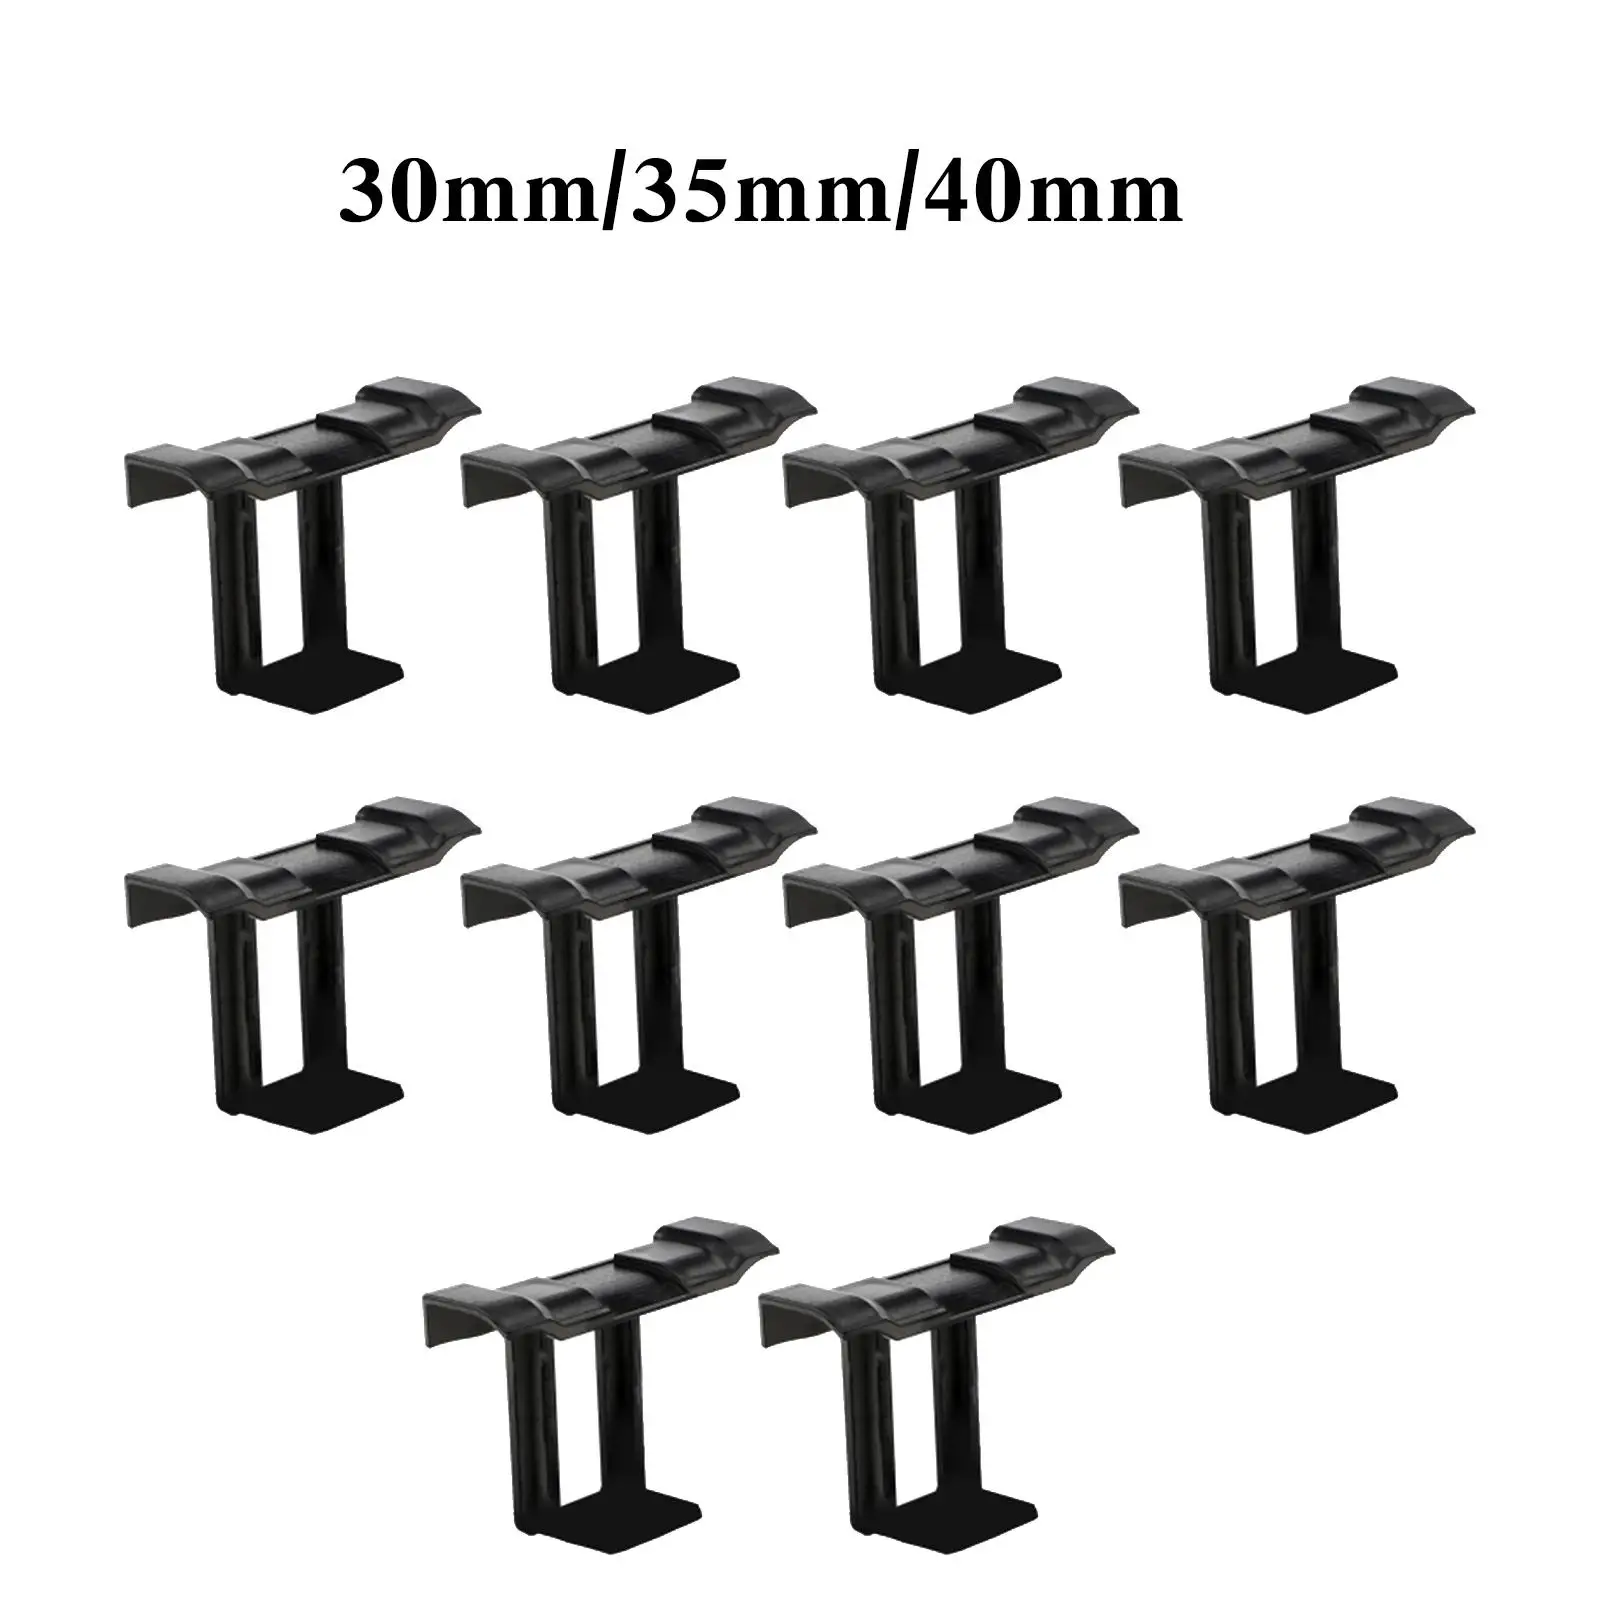 10 Pieces Solar Panel Remove Water Clips Auto Remove Stagnant Water Dust Pv Modules Cleaning Clips for Photovoltaic Panel